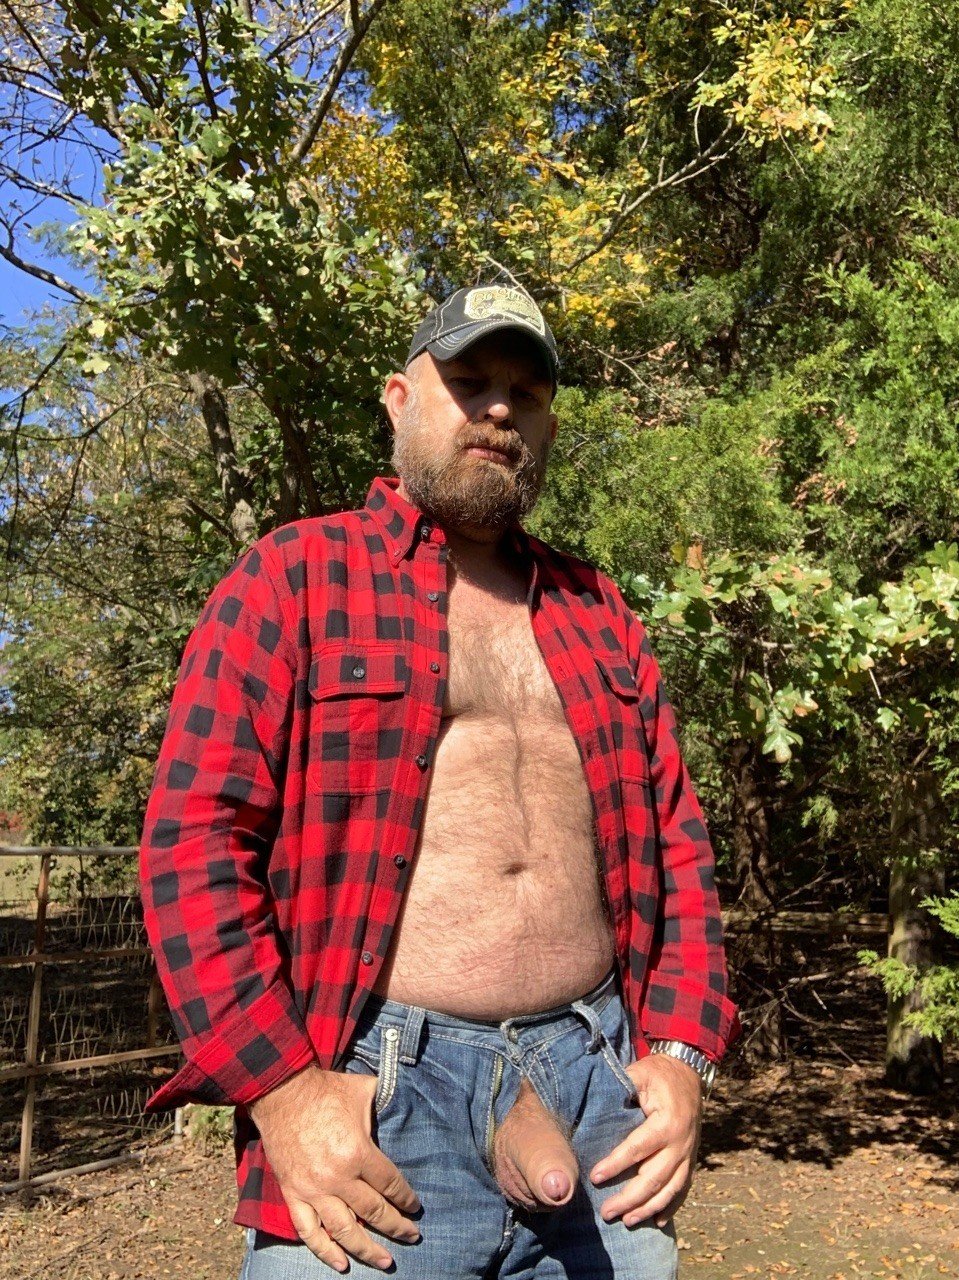 Photo by Beards-n-Foreskin with the username @Beards-n-Foreskin, posted on January 9, 2019